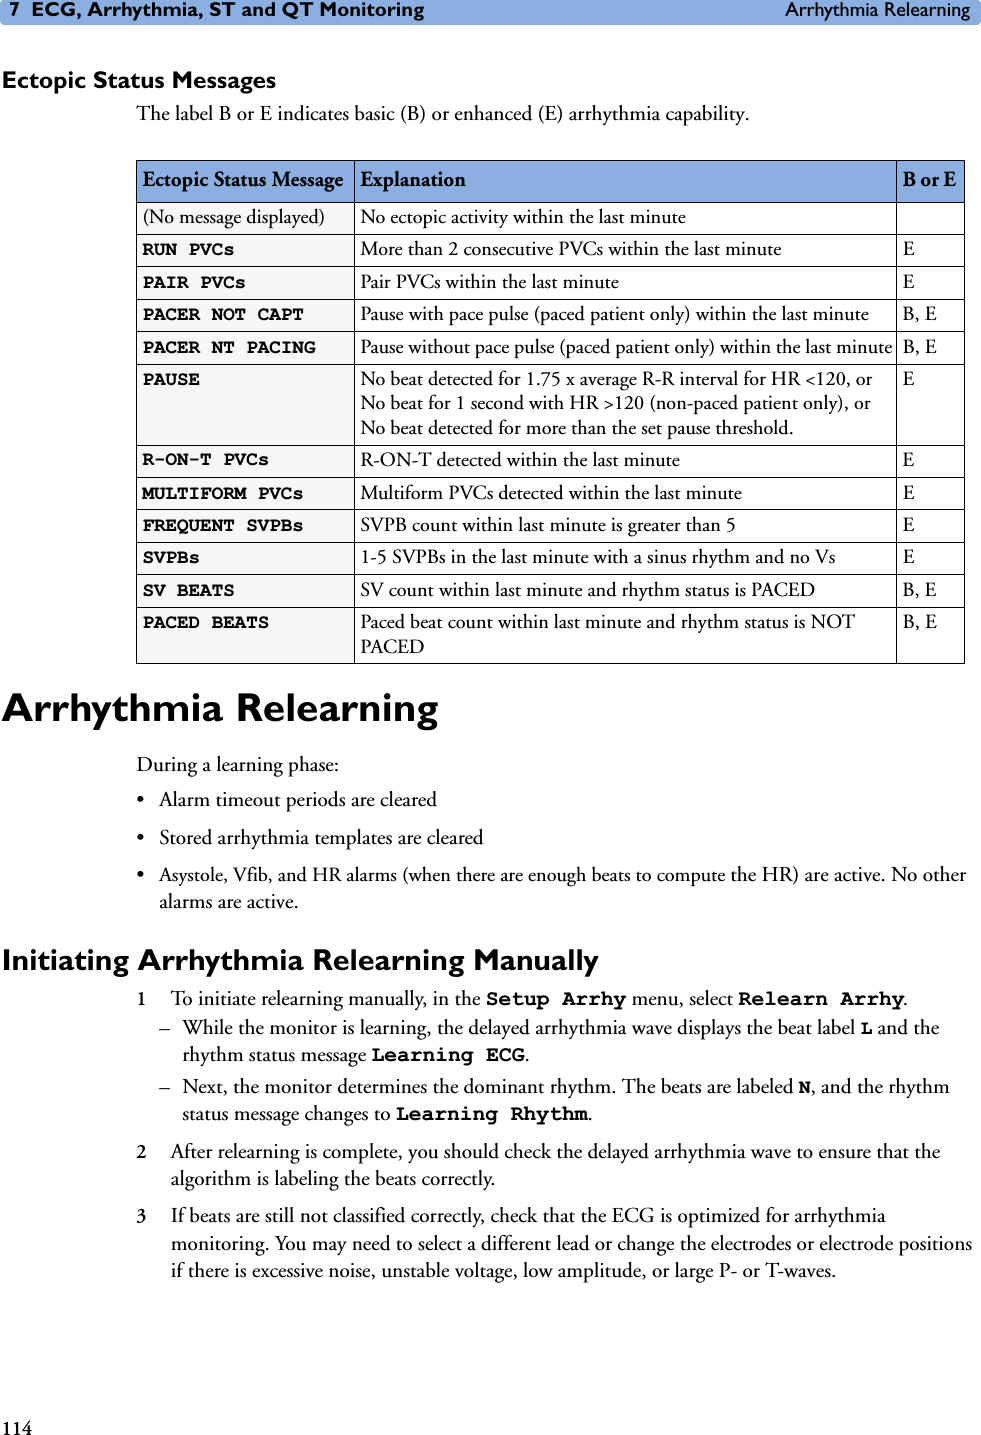 7 ECG, Arrhythmia, ST and QT Monitoring Arrhythmia Relearning114Ectopic Status MessagesThe label B or E indicates basic (B) or enhanced (E) arrhythmia capability.Arrhythmia RelearningDuring a learning phase:• Alarm timeout periods are cleared• Stored arrhythmia templates are cleared•Asystole, Vfib, and HR alarms (when there are enough beats to compute the HR) are active. No other alarms are active.Initiating Arrhythmia Relearning Manually1To initiate relearning manually, in the Setup Arrhy menu, select Relearn Arrhy.– While the monitor is learning, the delayed arrhythmia wave displays the beat label L and the rhythm status message Learning ECG. – Next, the monitor determines the dominant rhythm. The beats are labeled N, and the rhythm status message changes to Learning Rhythm.2After relearning is complete, you should check the delayed arrhythmia wave to ensure that the algorithm is labeling the beats correctly. 3If beats are still not classified correctly, check that the ECG is optimized for arrhythmia monitoring. You may need to select a different lead or change the electrodes or electrode positions if there is excessive noise, unstable voltage, low amplitude, or large P- or T-waves. Ectopic Status Message Explanation B or E (No message displayed) No ectopic activity within the last minuteRUN PVCs  More than 2 consecutive PVCs within the last minute EPAIR PVCs  Pair PVCs within the last minute EPACER NOT CAPT  Pause with pace pulse (paced patient only) within the last minute B, EPACER NT PACING  Pause without pace pulse (paced patient only) within the last minute B, EPAUSE  No beat detected for 1.75 x average R-R interval for HR &lt;120, or No beat for 1 second with HR &gt;120 (non-paced patient only), or No beat detected for more than the set pause threshold.ER-ON-T PVCs R-ON-T detected within the last minute EMULTIFORM PVCs  Multiform PVCs detected within the last minute EFREQUENT SVPBs  SVPB count within last minute is greater than 5 ESVPBs  1-5 SVPBs in the last minute with a sinus rhythm and no Vs ESV BEATS  SV count within last minute and rhythm status is PACED B, EPACED BEATS  Paced beat count within last minute and rhythm status is NOT PACEDB, E